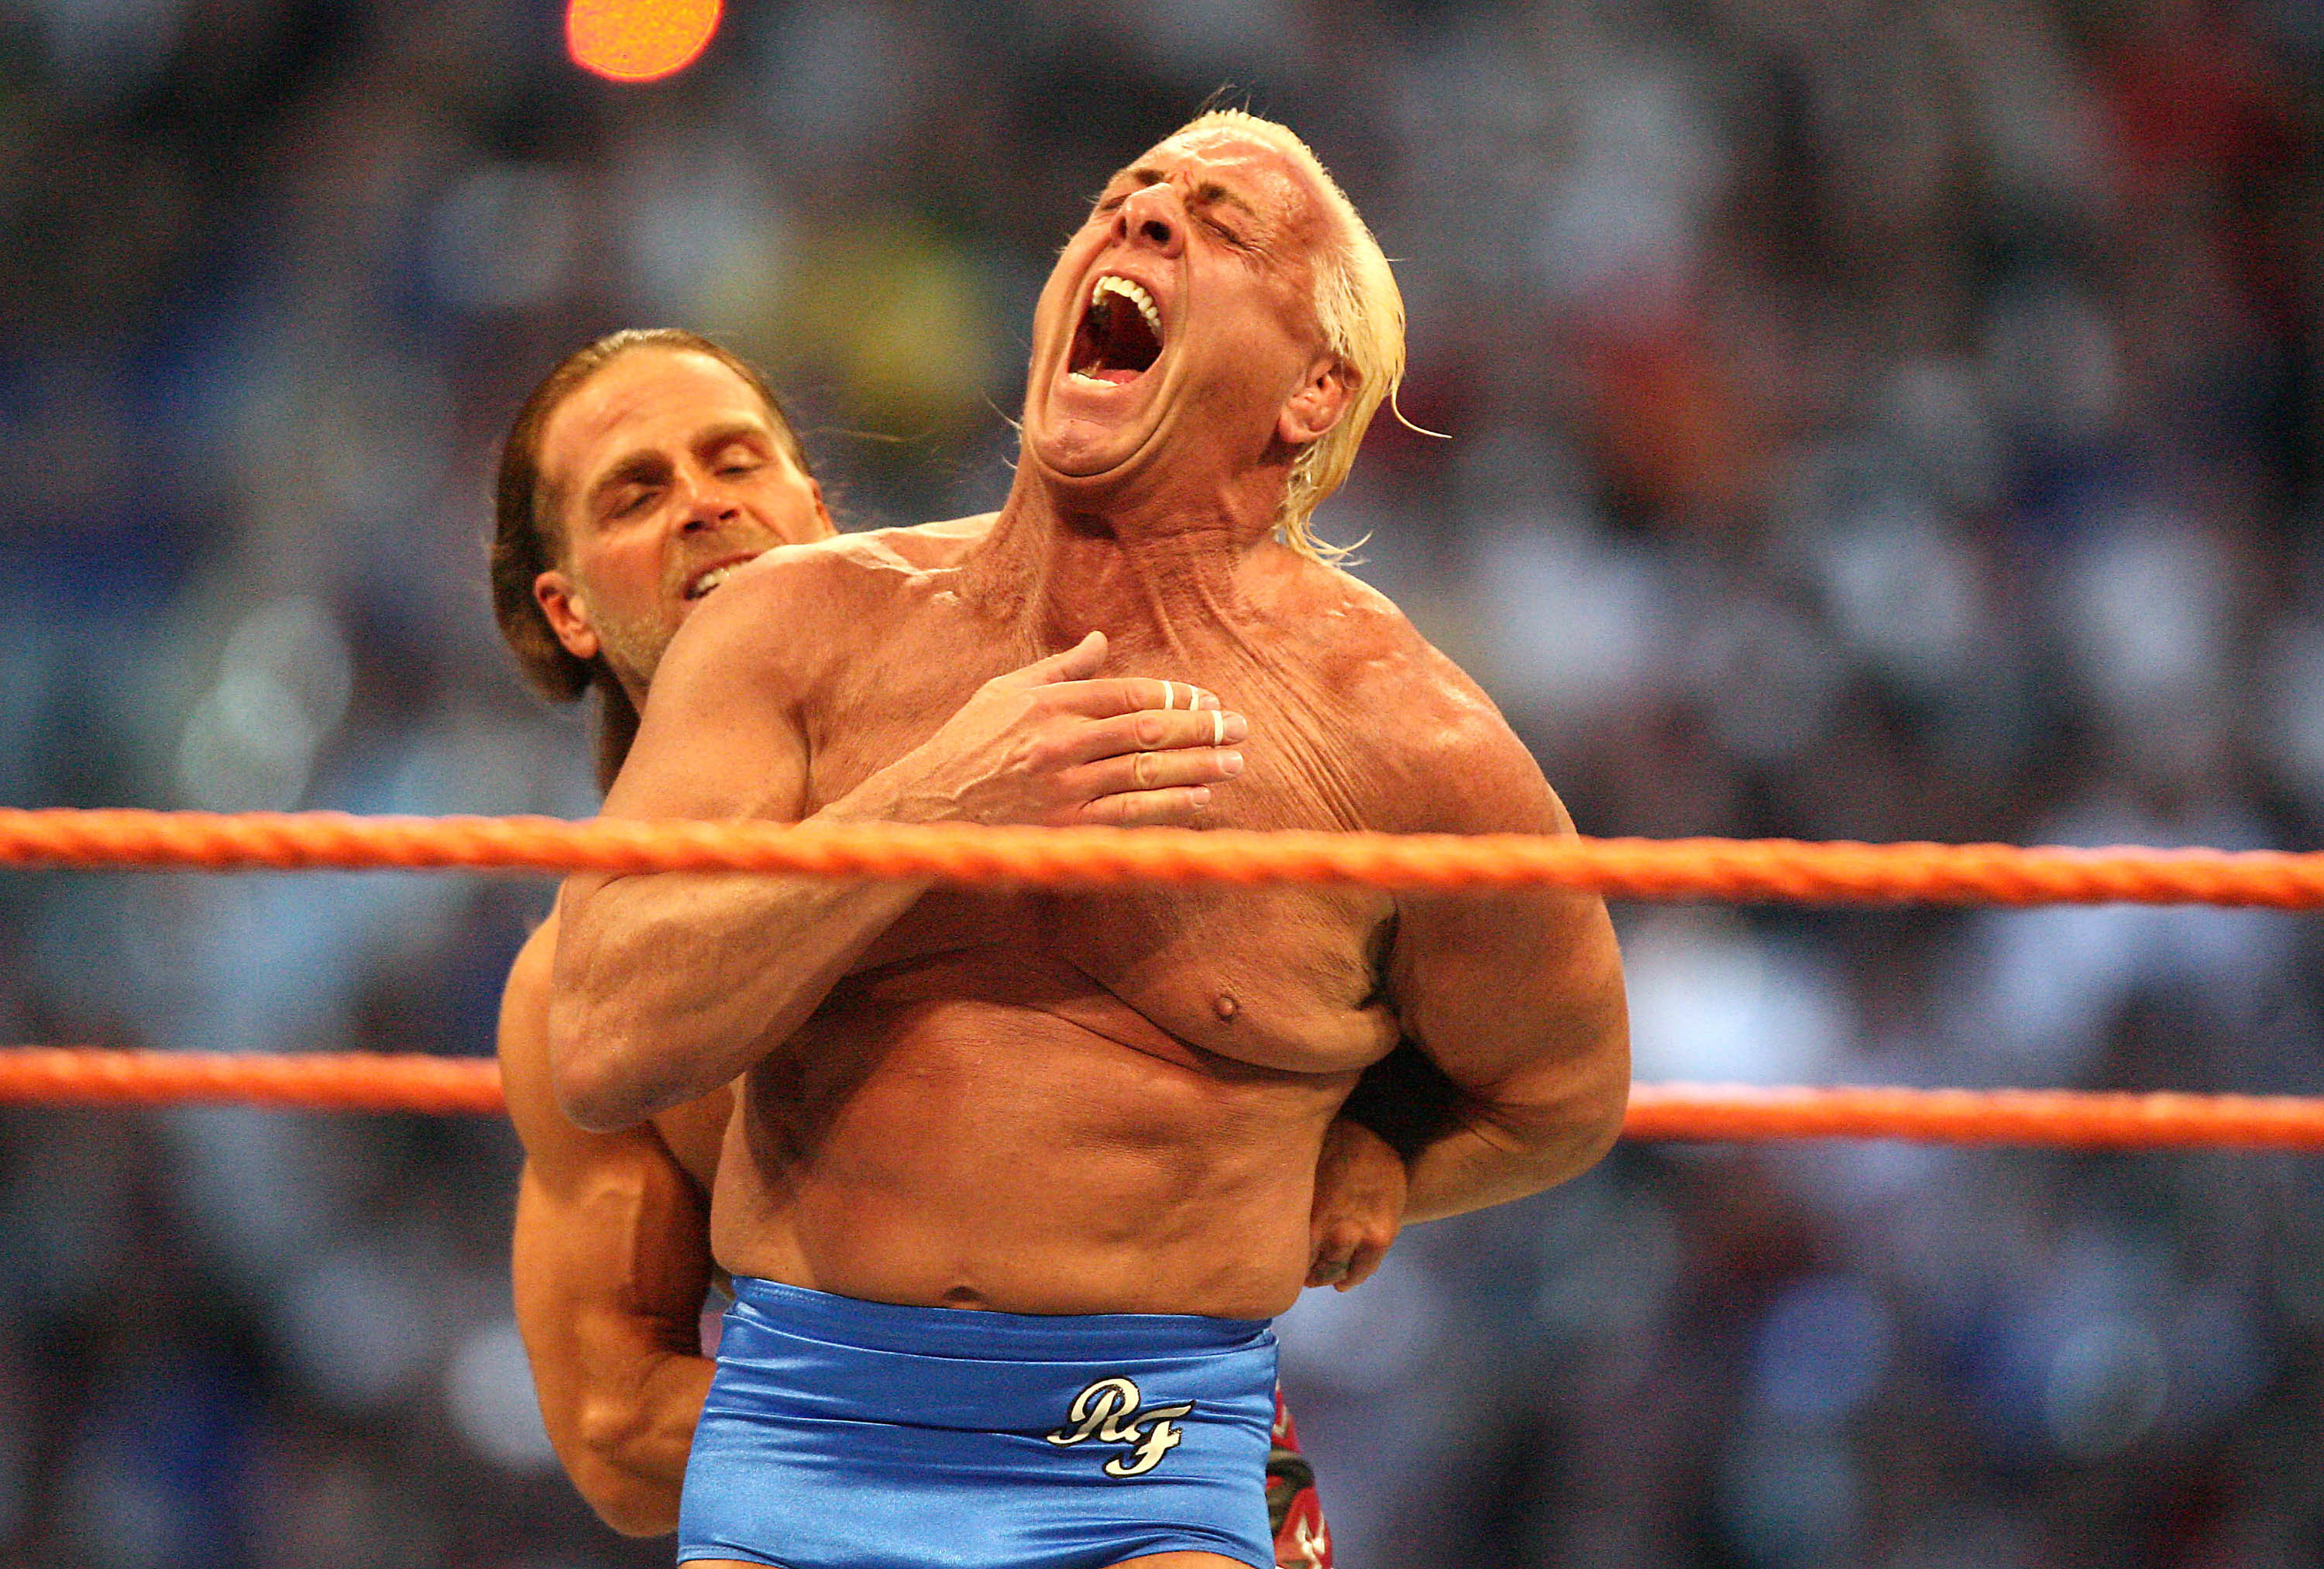 Ric Flair (front) and Shawn Michaels wrestle in the Career Threatening Match at WrestleMania XXIV at the Citrus Bowl on Sunday, March 30, 2008